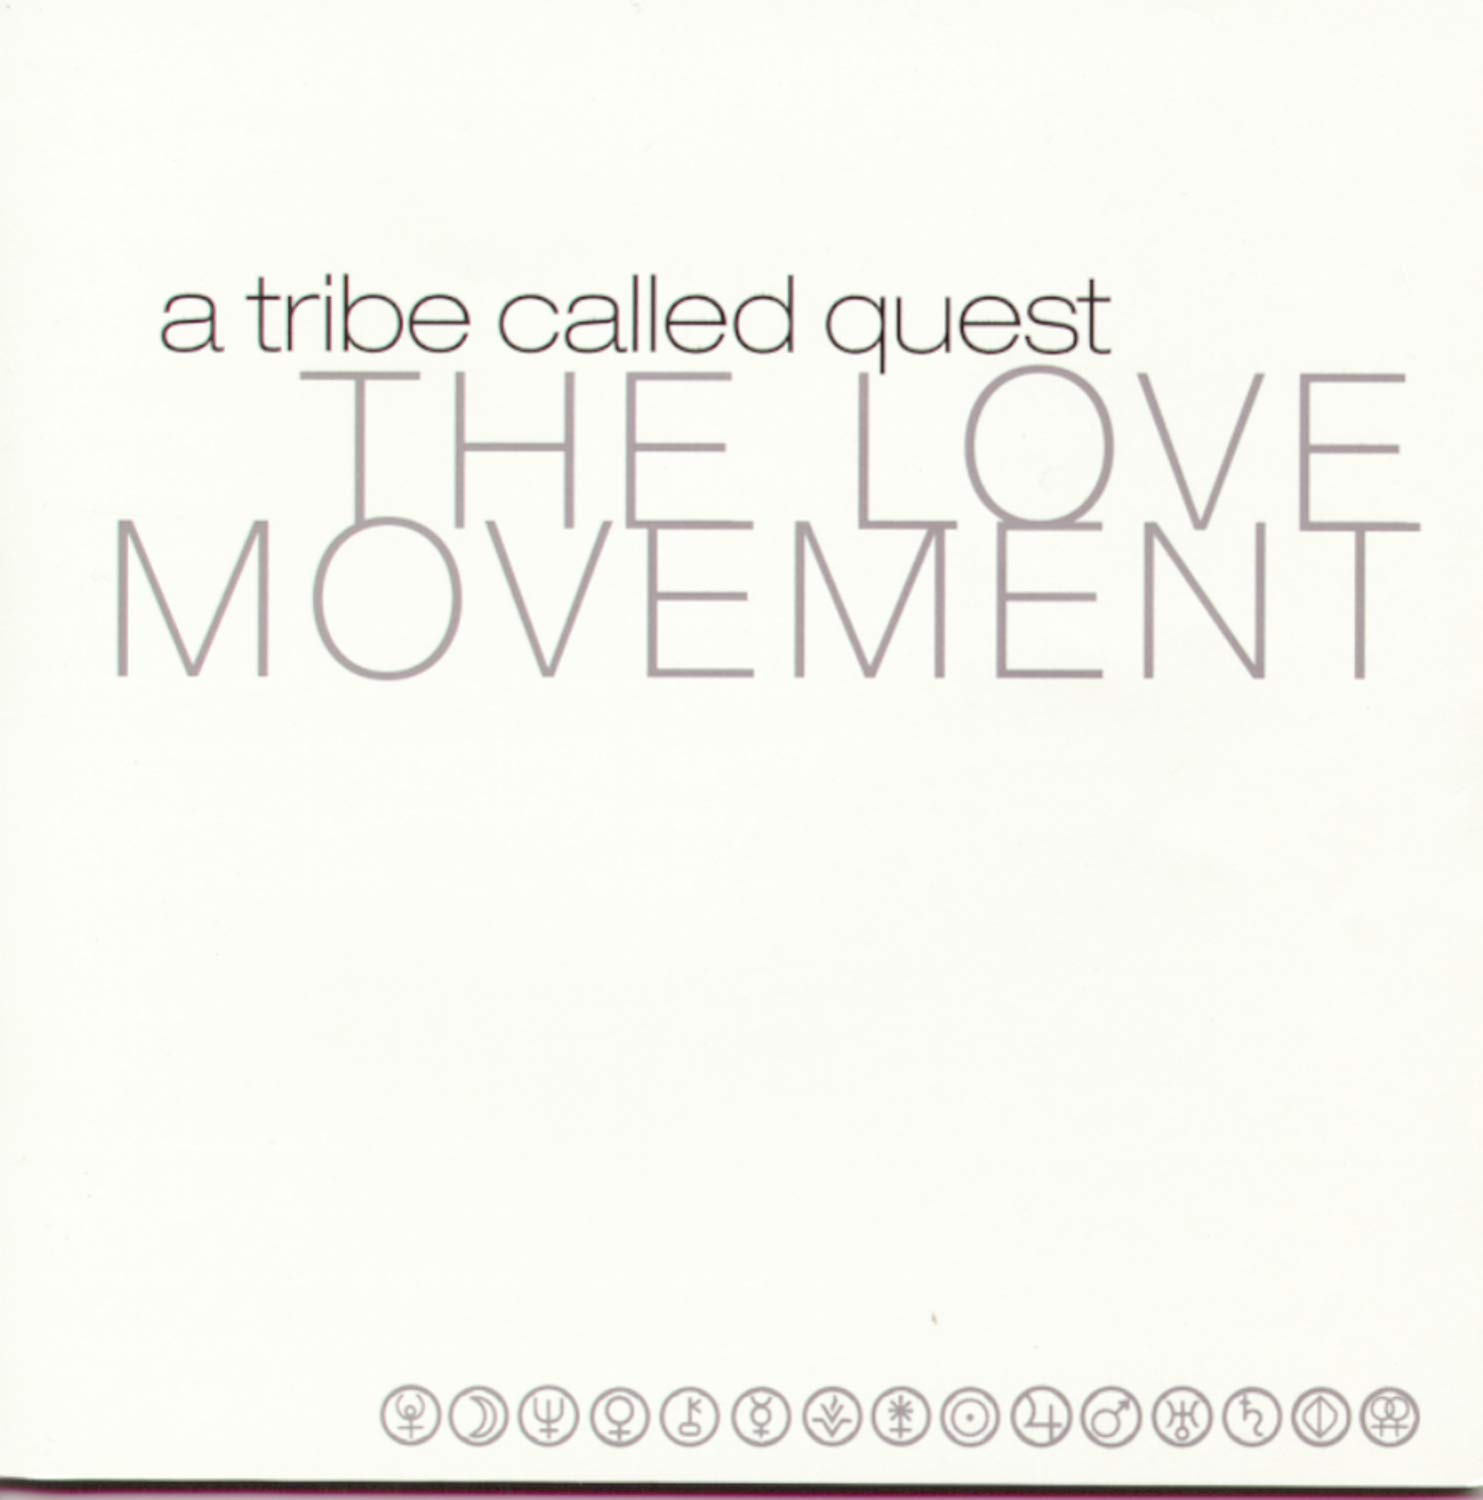 Tribe Called Quest/Love Movement (Edited)@Lmtd Ed.